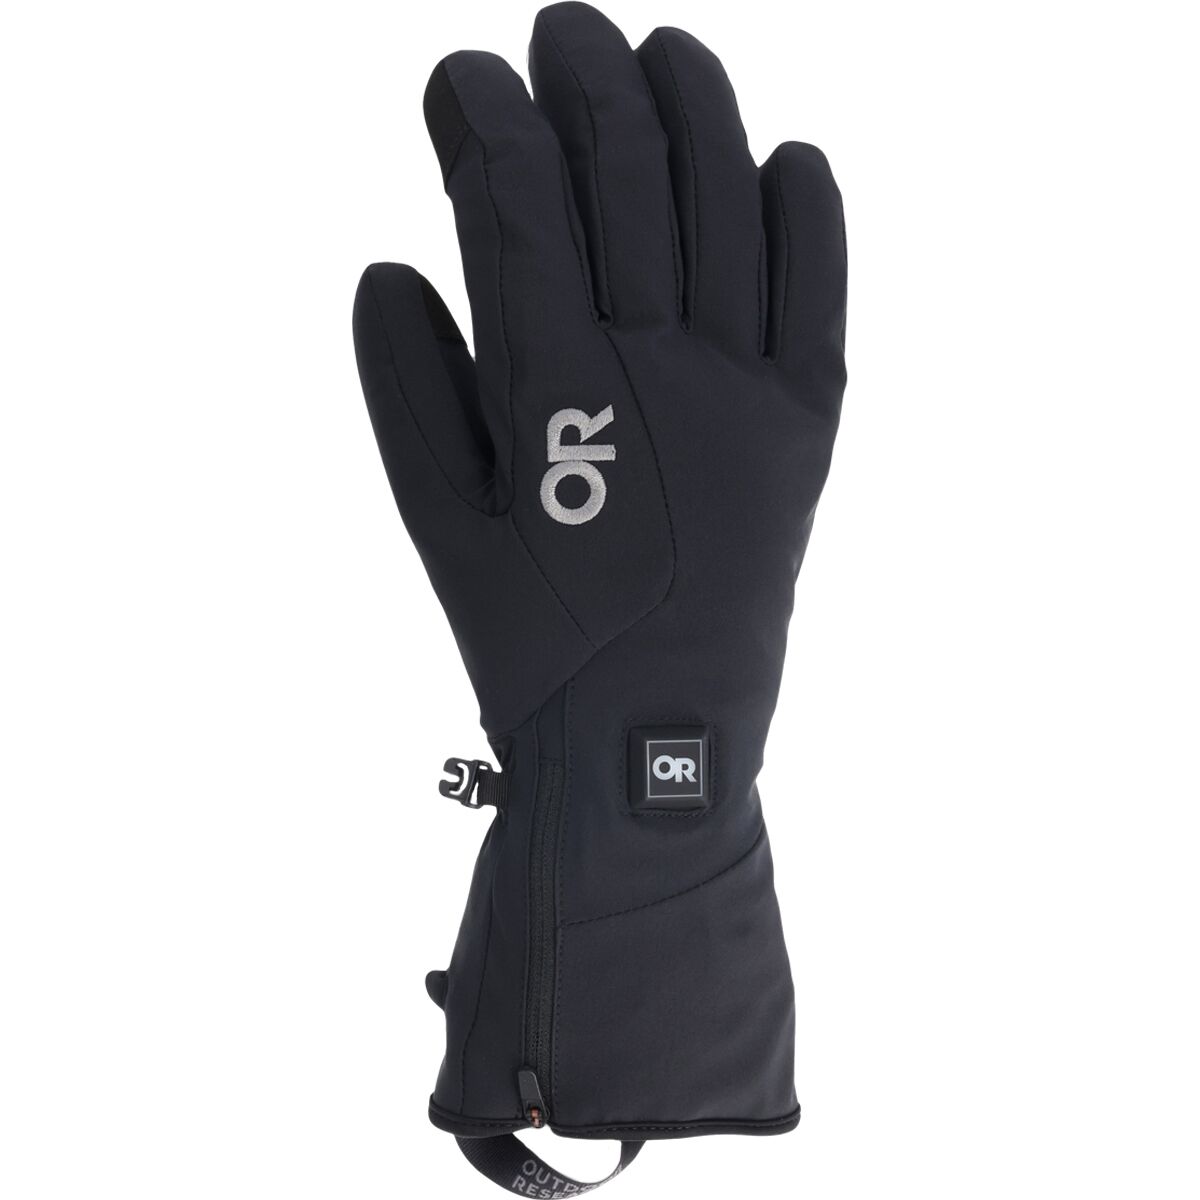 Outdoor Research Sureshot Heated Softshell Glove